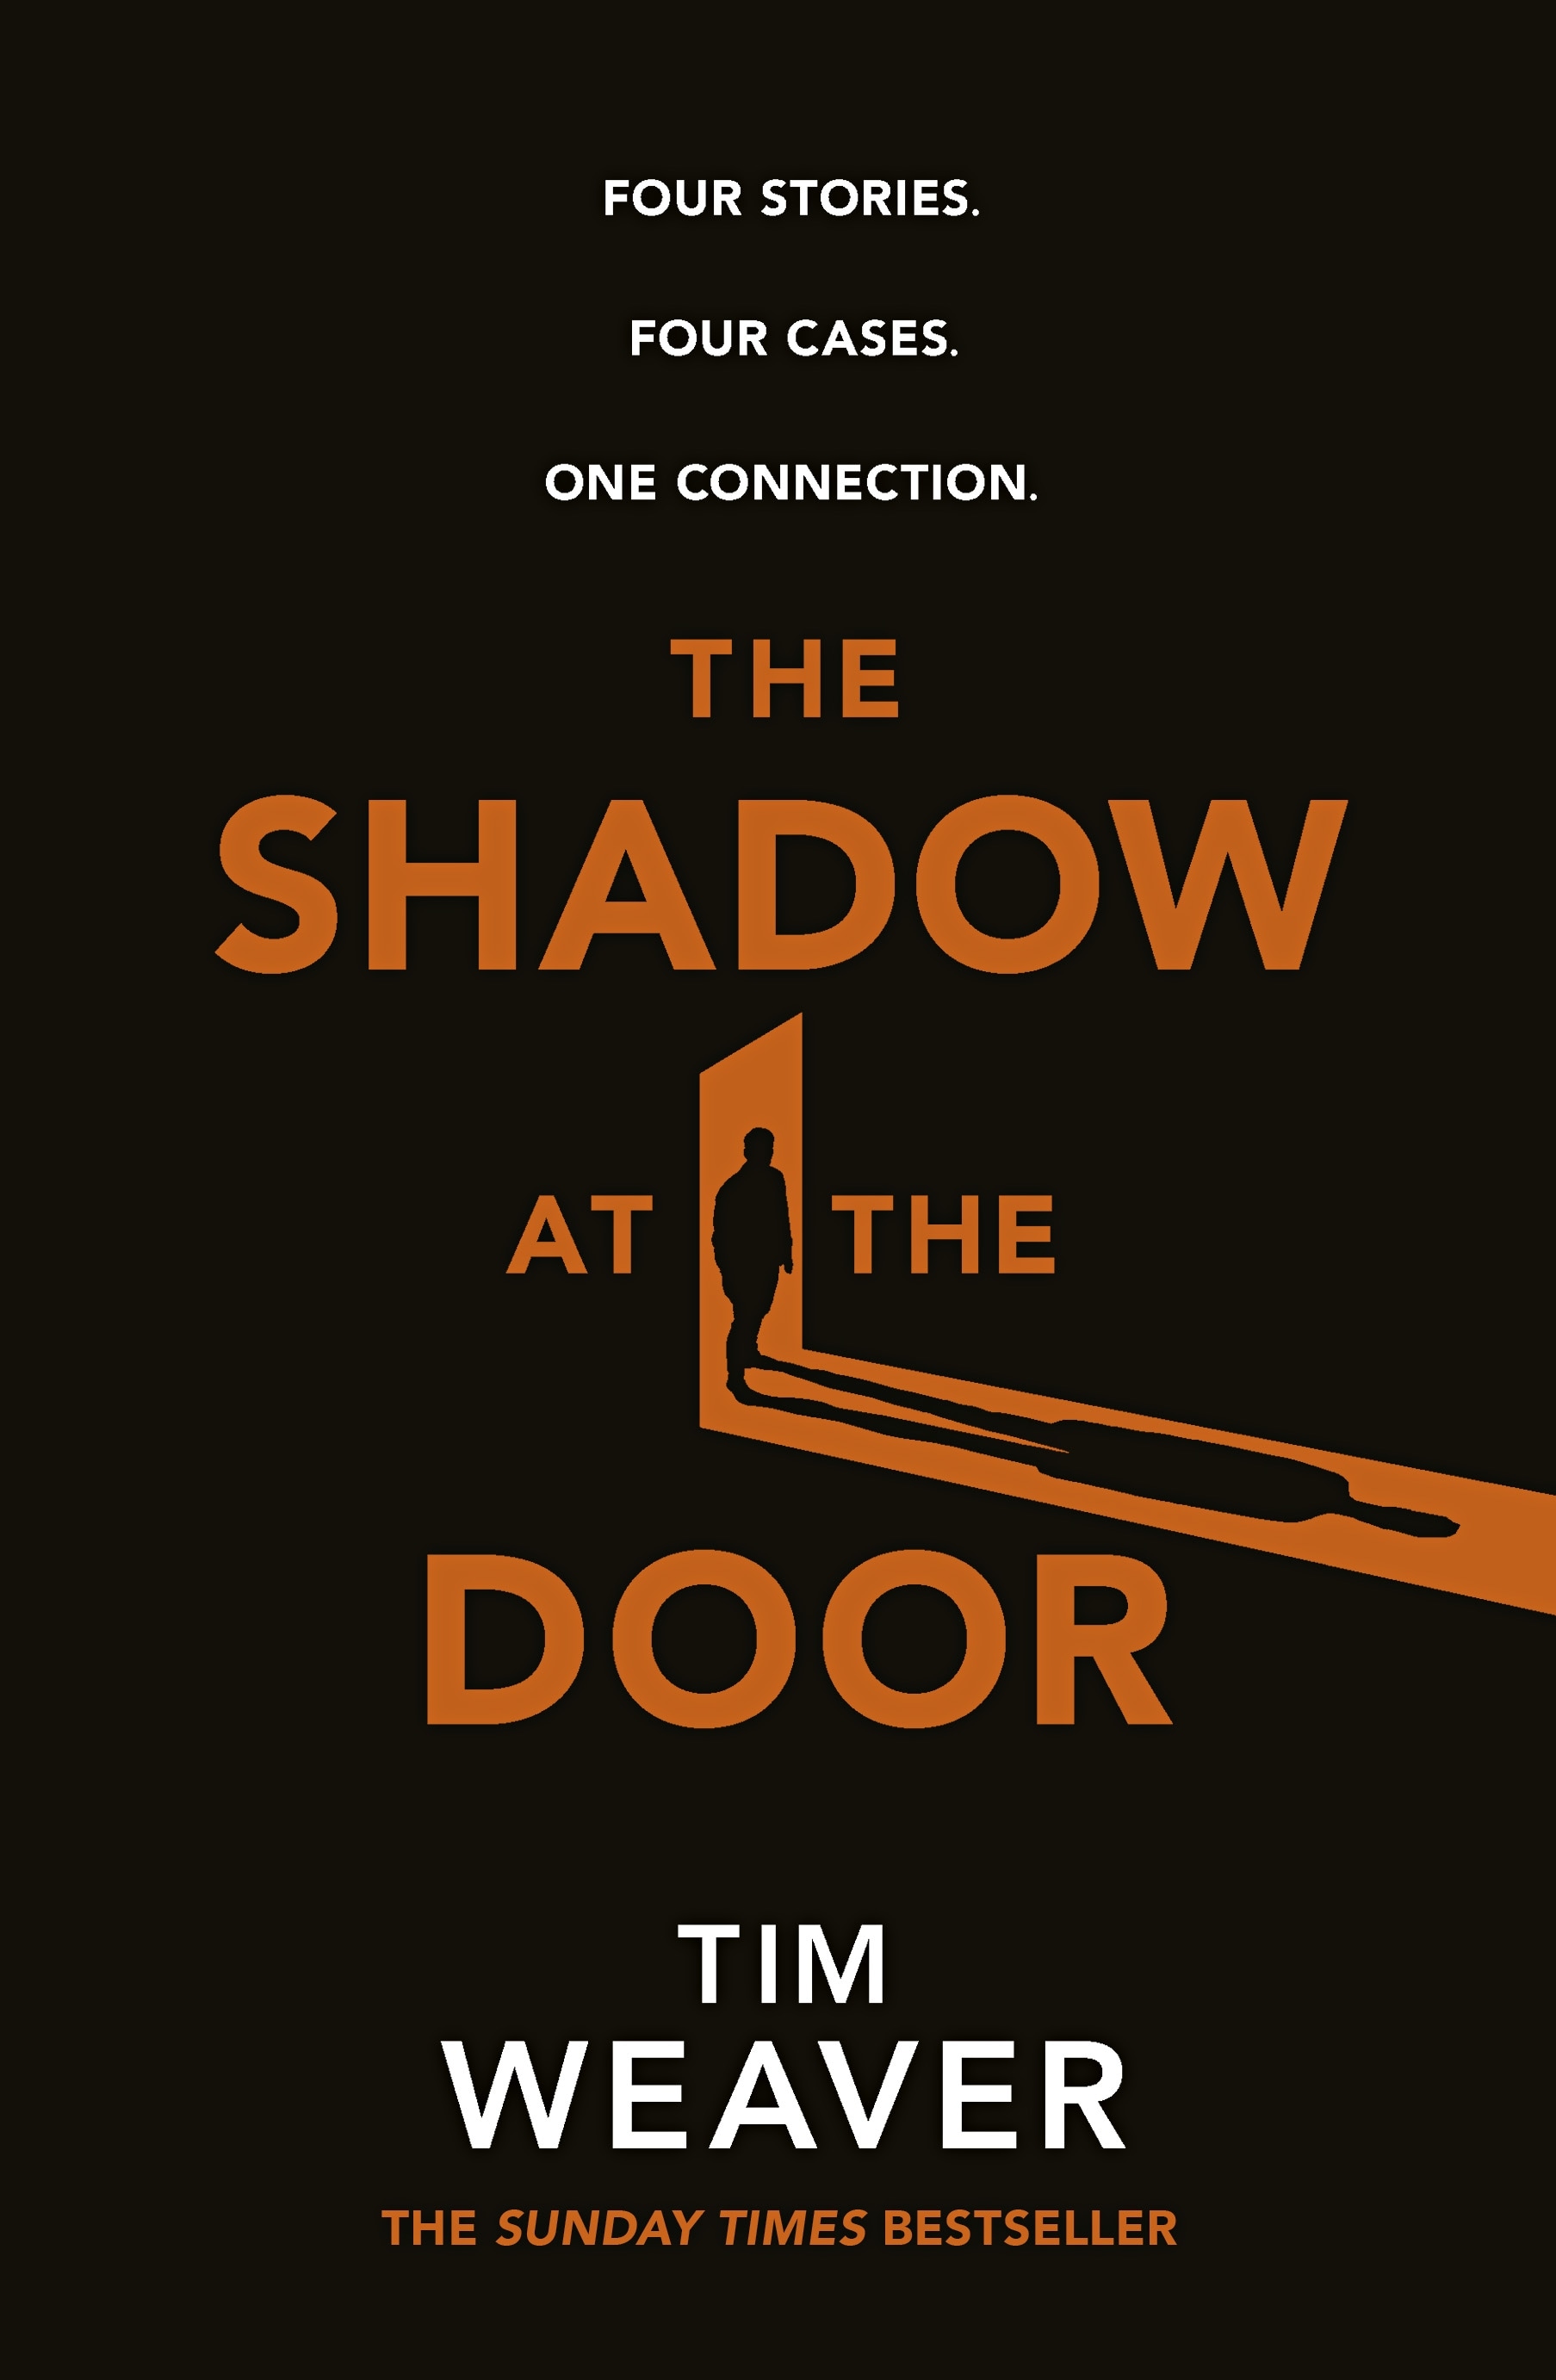 Book “The Shadow at the Door” by Tim Weaver — November 11, 2021